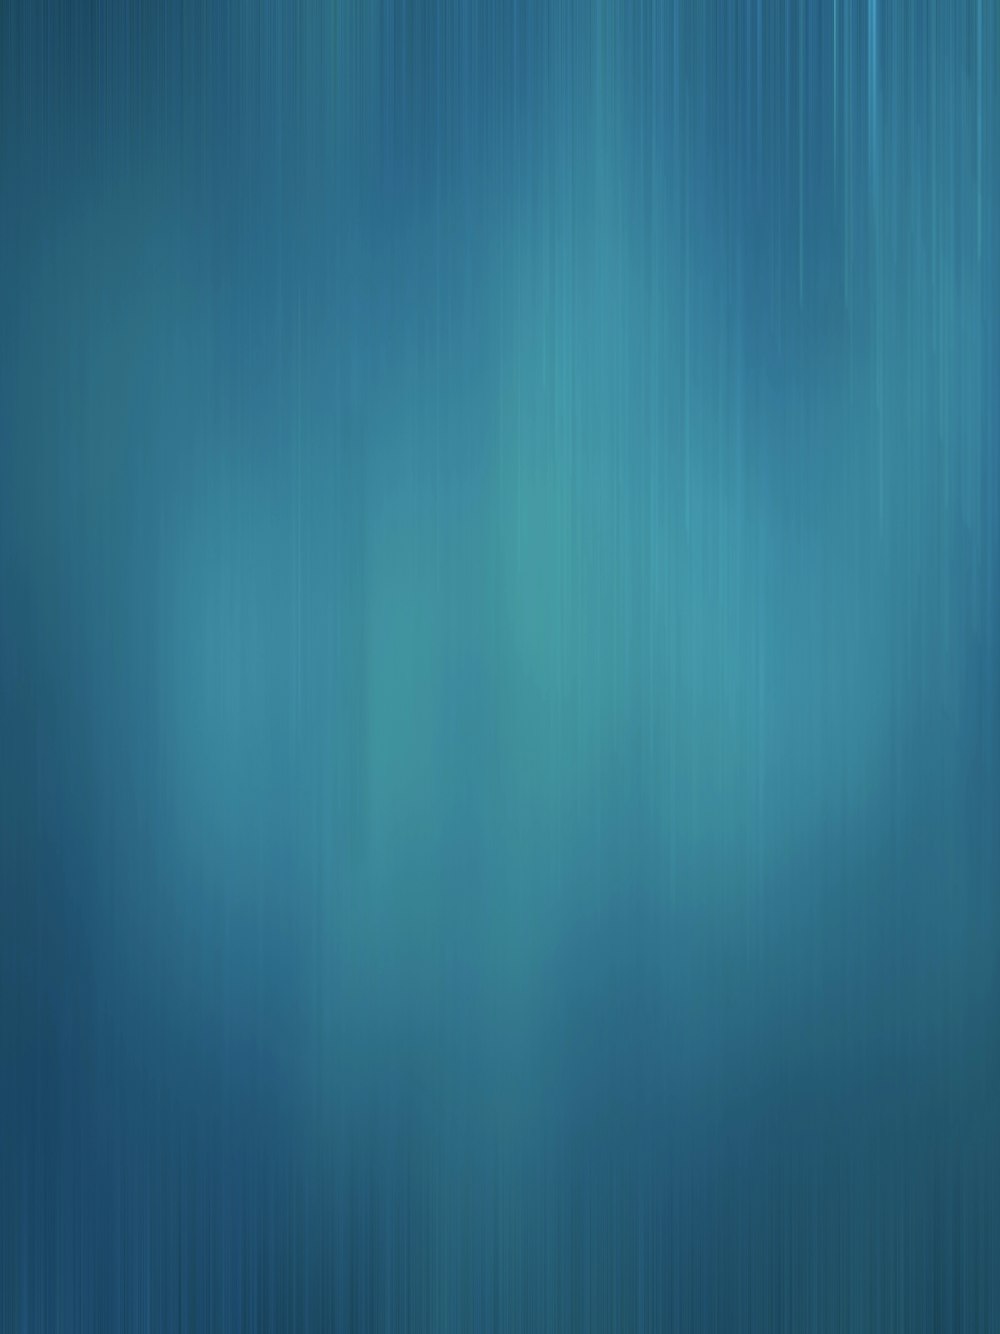 a blurry blue background with horizontal lines